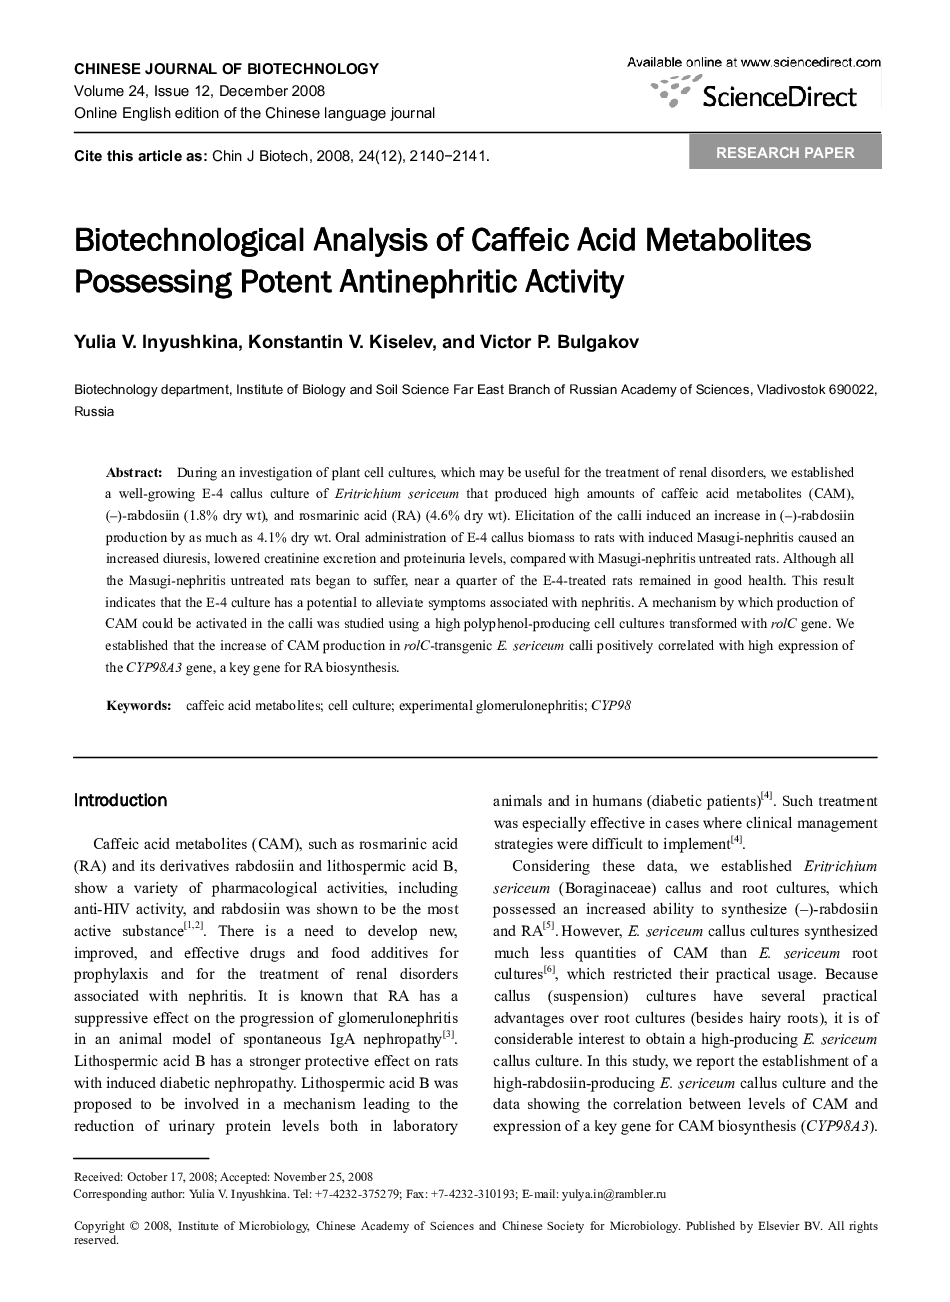 Biotechnological Analysis of Caffeic Acid Metabolites Possessing Potent Antinephritic Activity